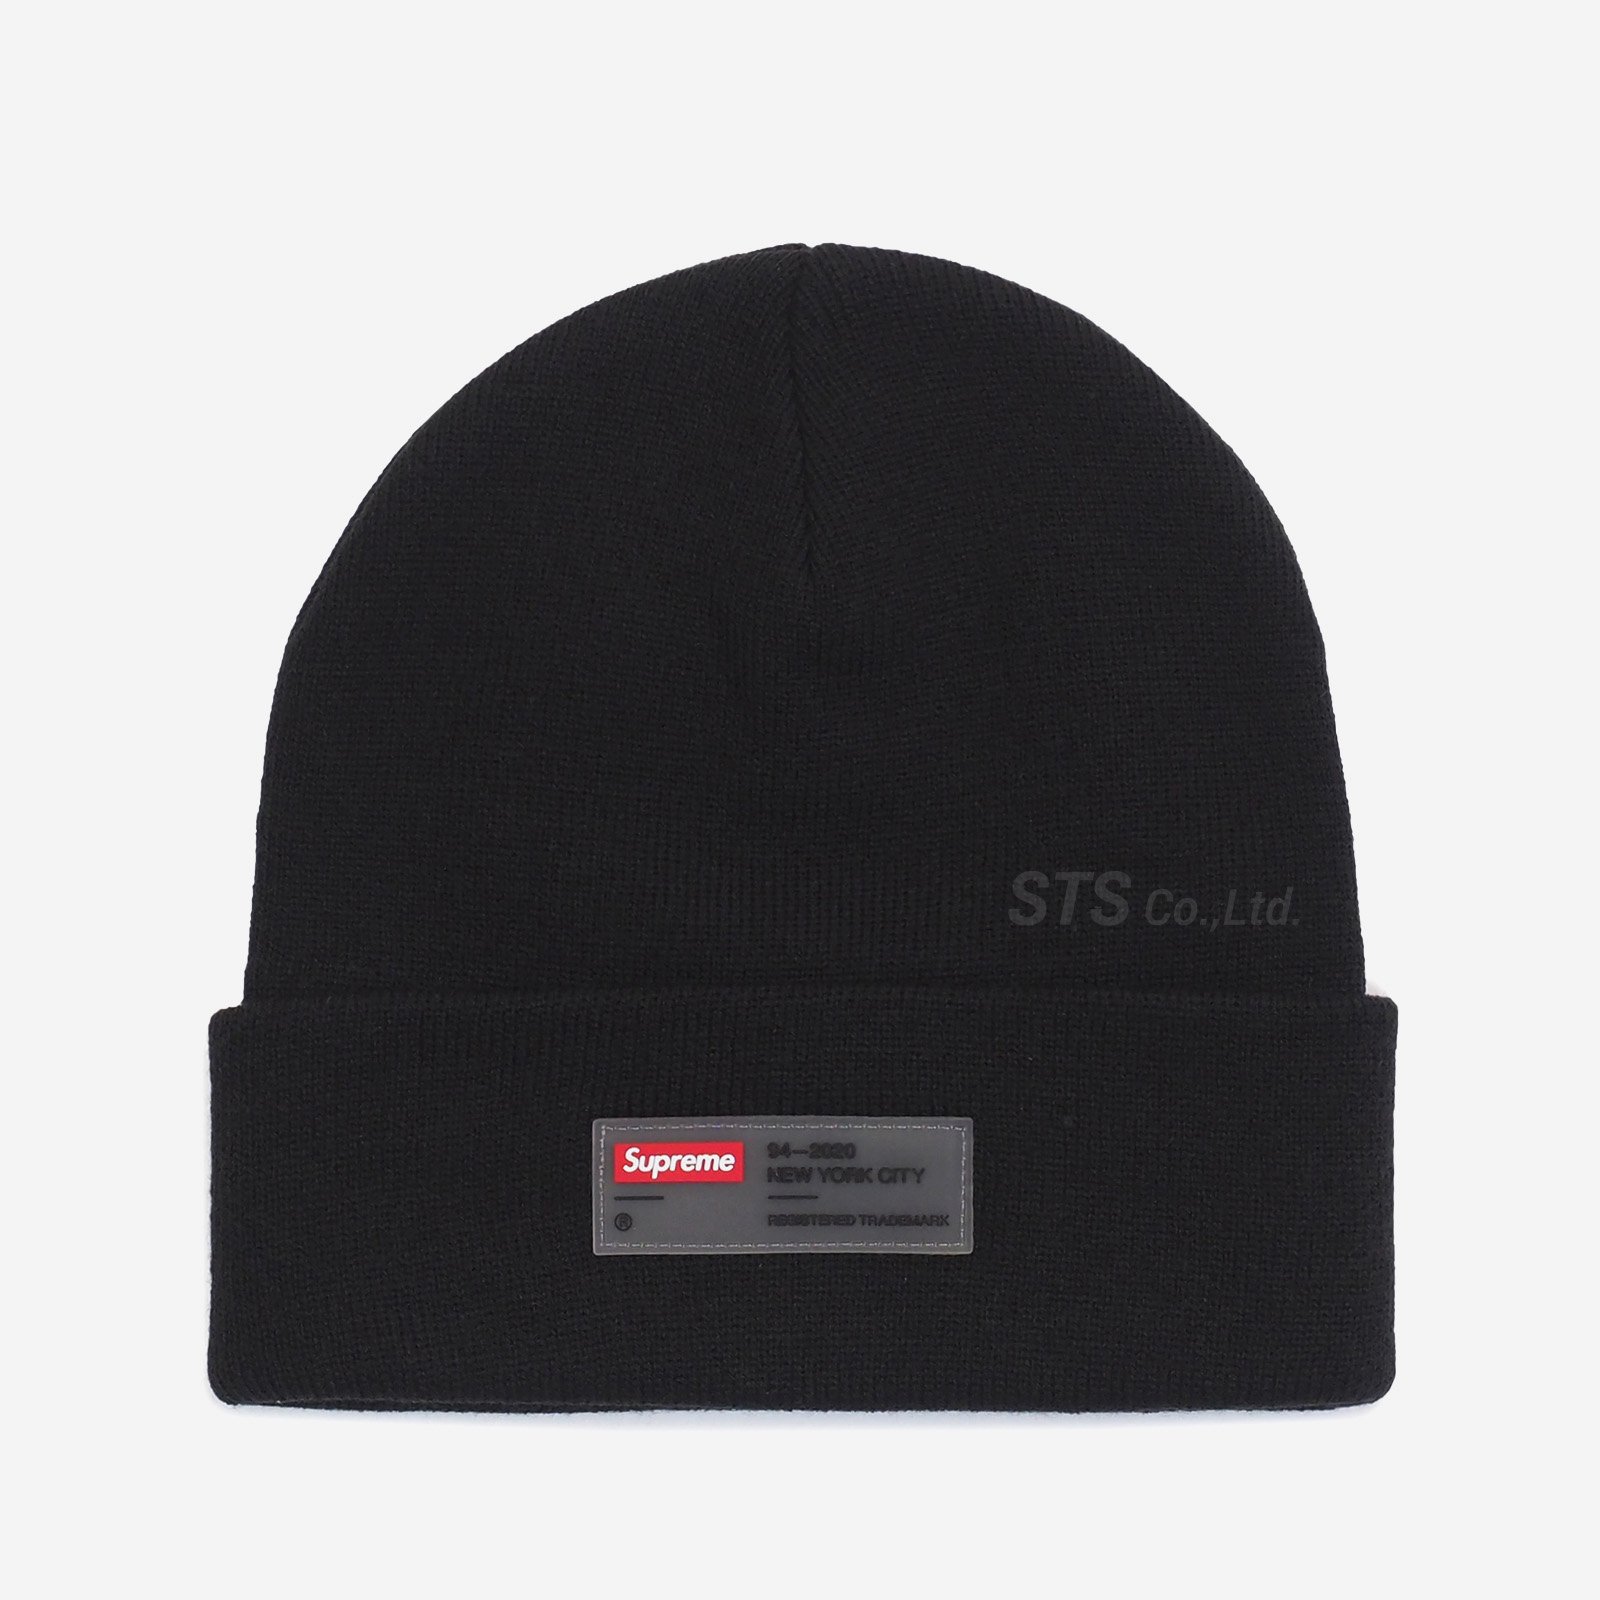 SUPREME Clear Label BEANIE 新品未使用、タグ付き - ニットキャップ